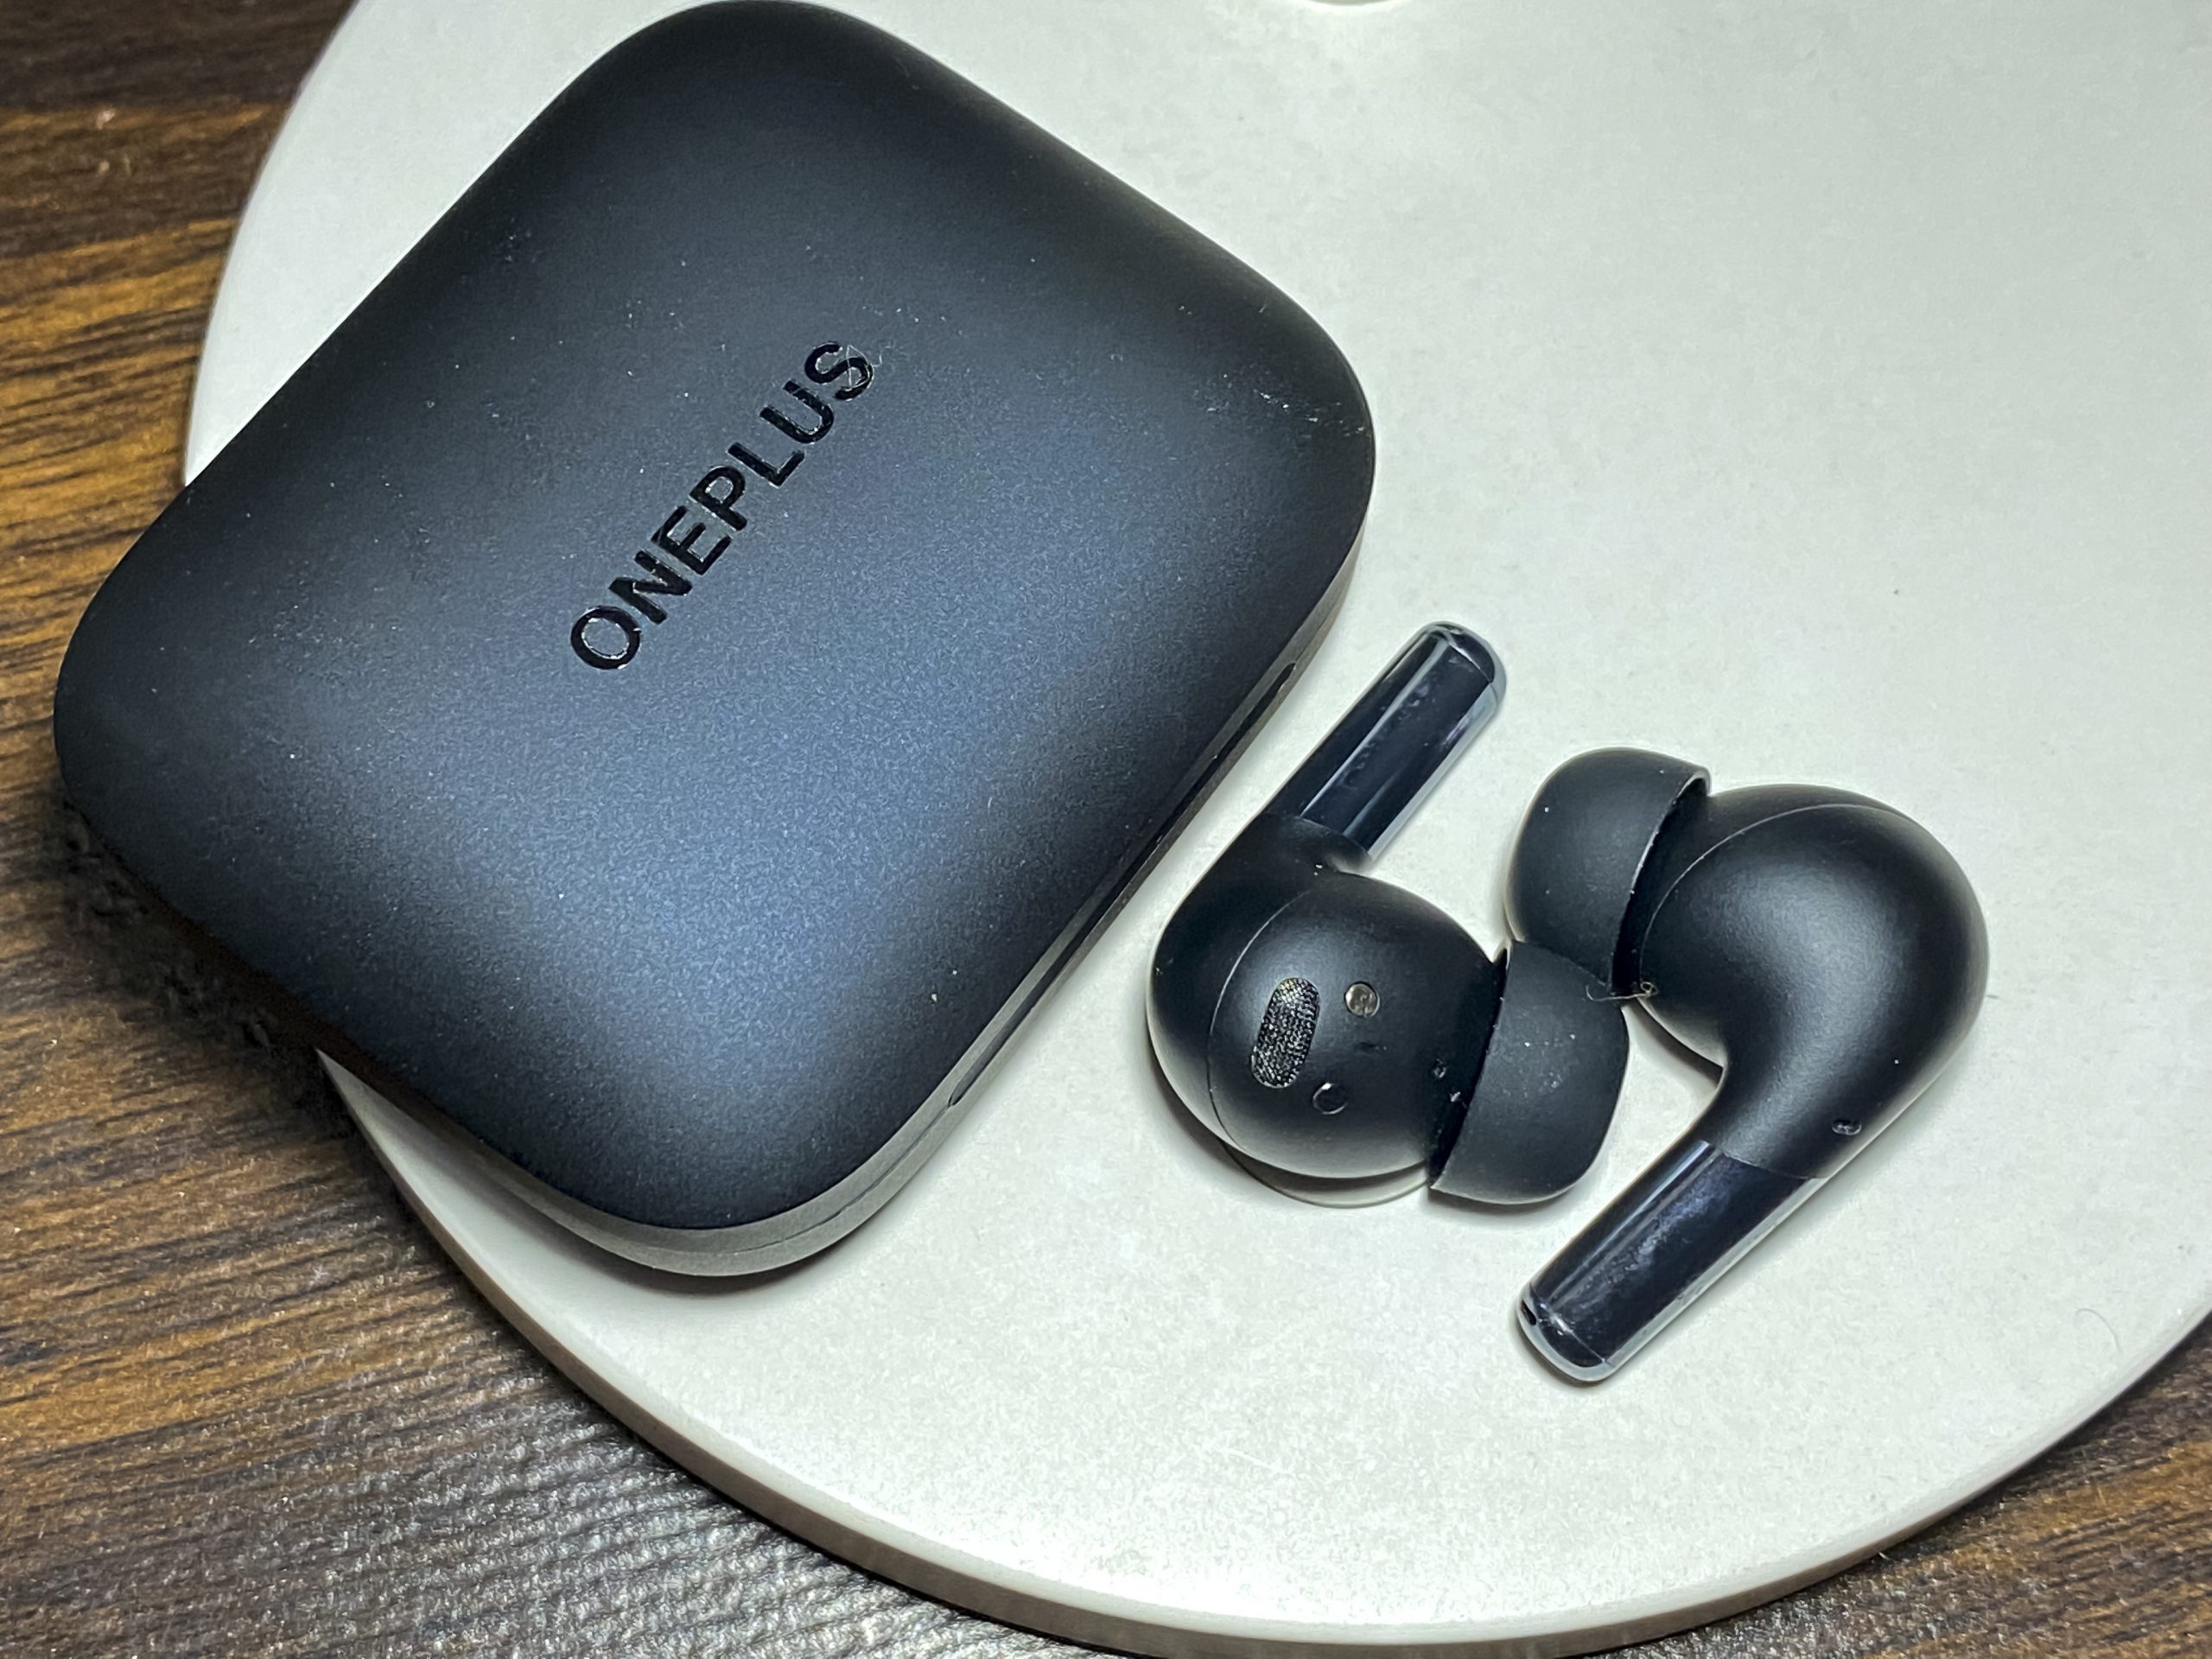 Nothing ear (1) review with pros and cons - should you buy it? - Smartprix